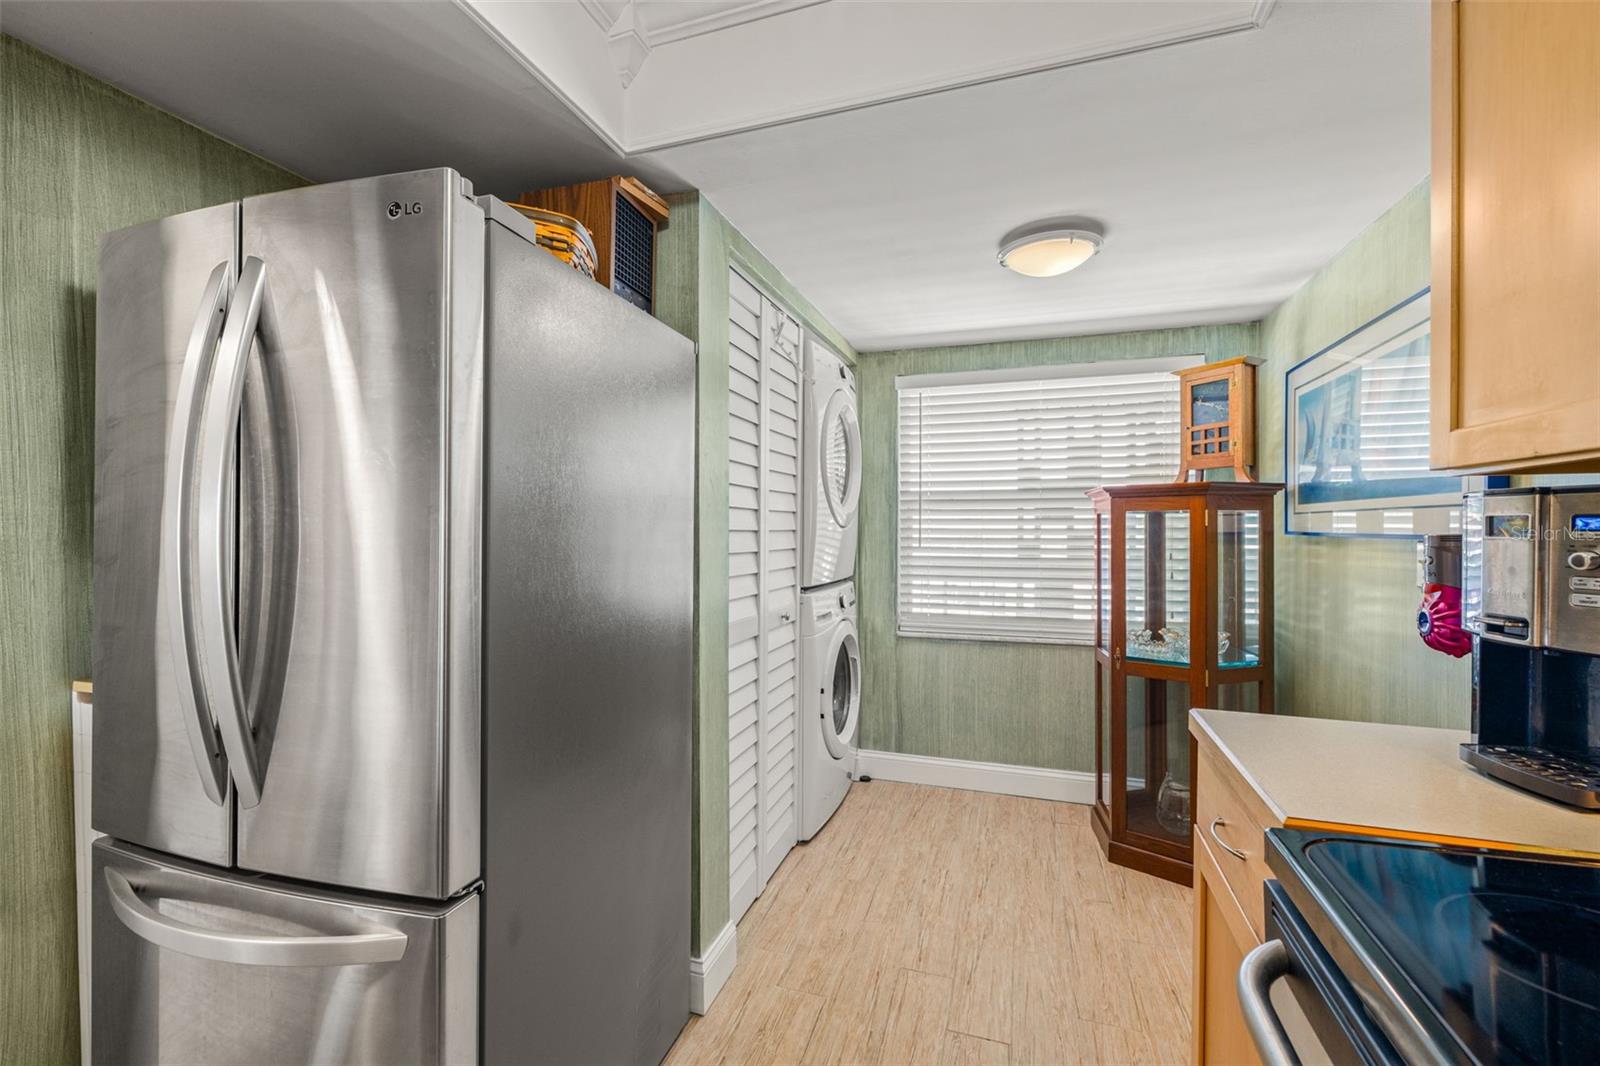 Roomy, efficient kitchen features an eat-in space or additional storage.